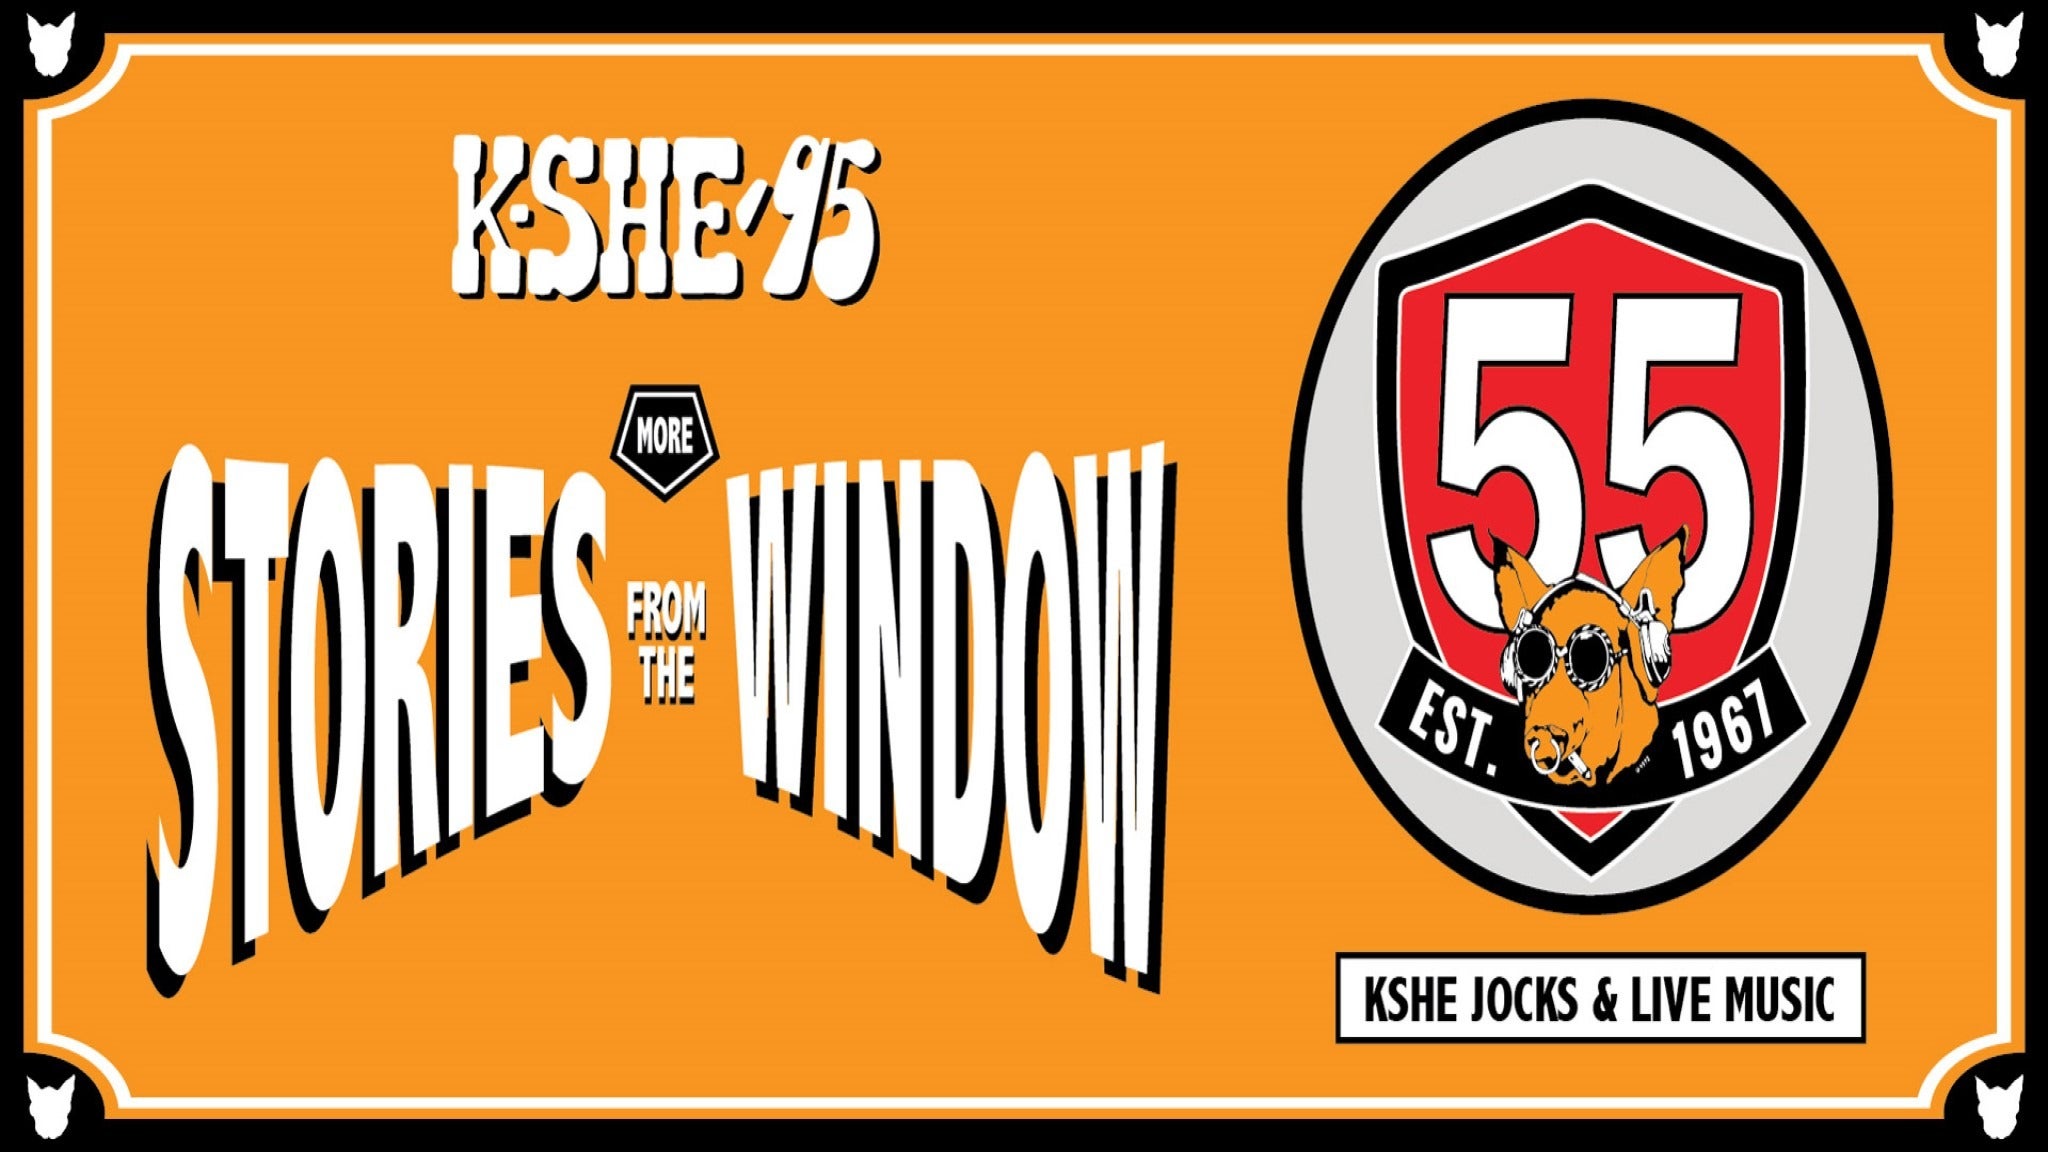 KSHE-95 Presents: More Stories from the Window